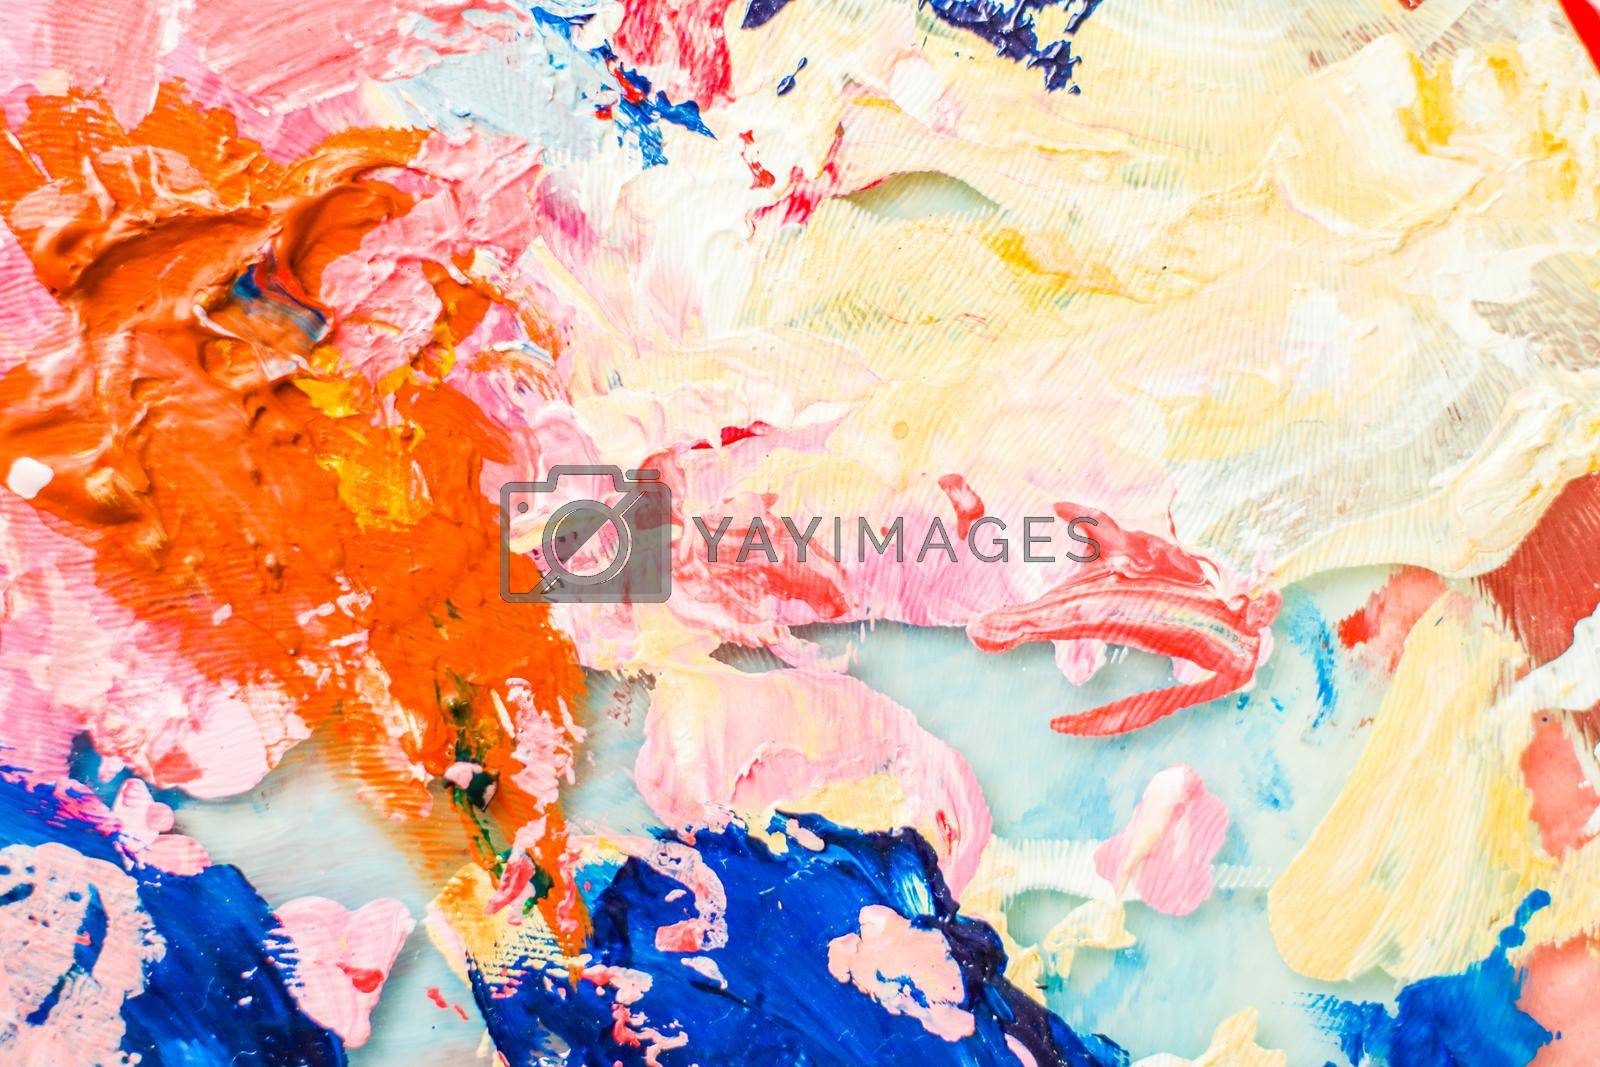 Royalty free image of Abstract acrylic paint strokes, art brush flatlay background by Anneleven